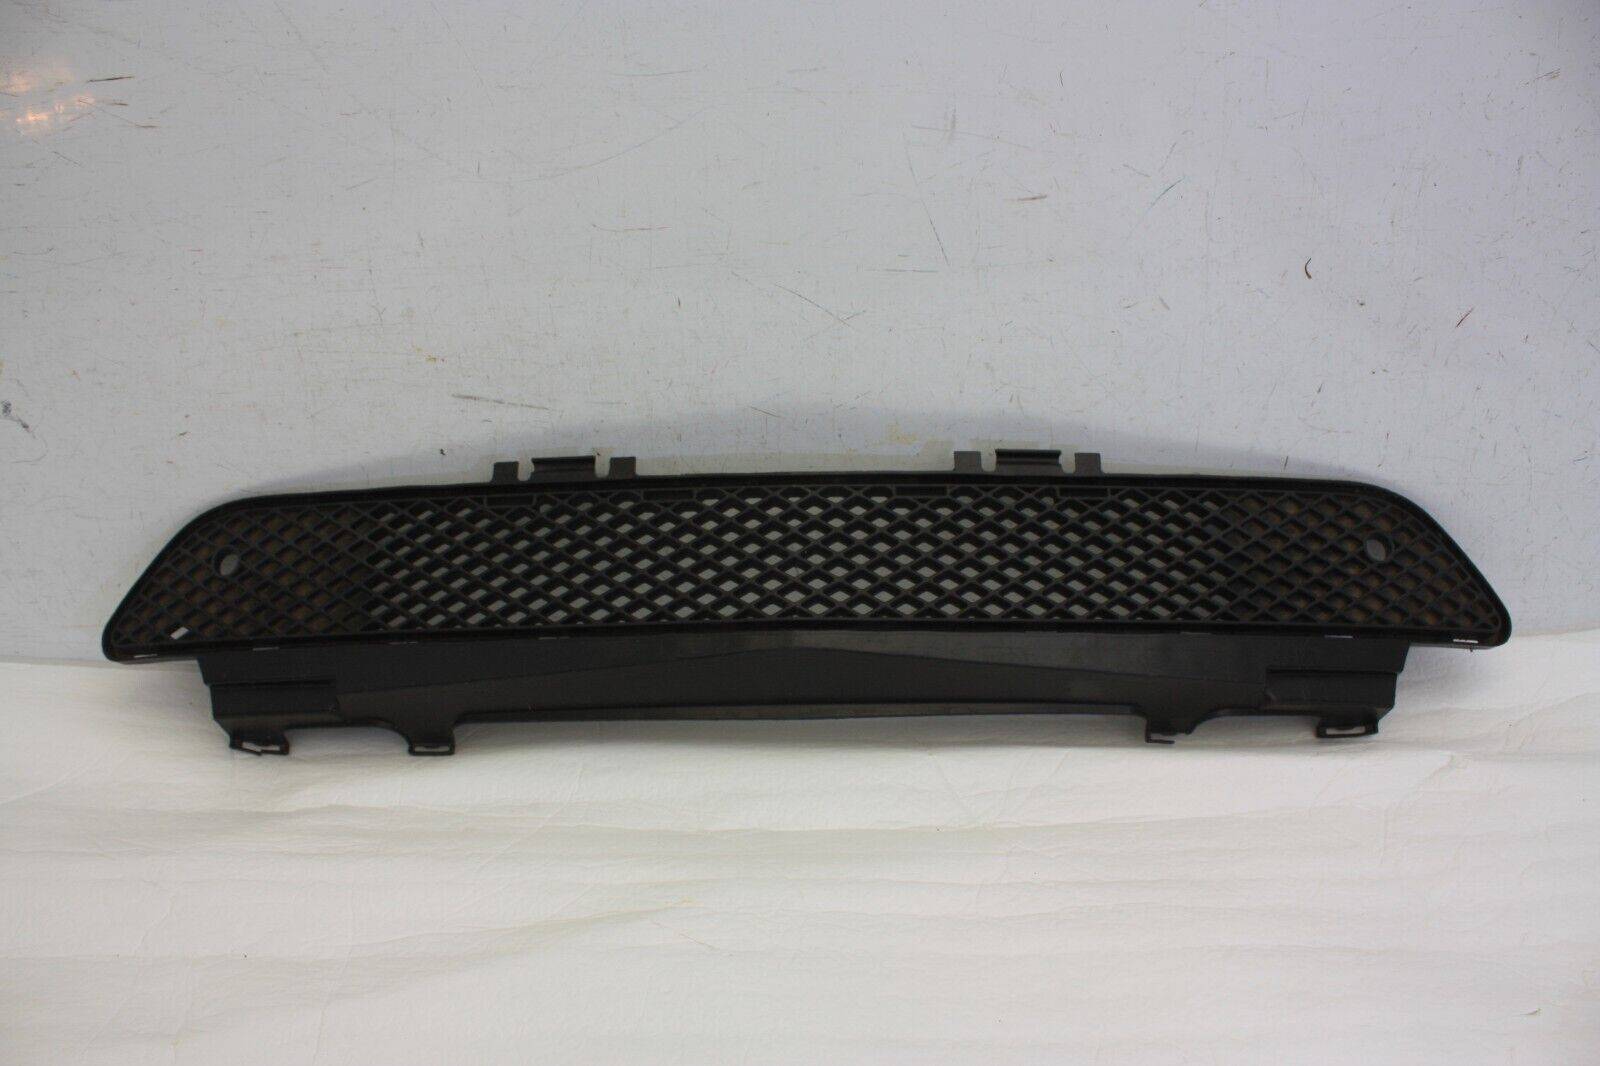 Mercedes CLC C203 Front Bumper Lower Grill A2038851953 Genuine DAMAGED 176249364818